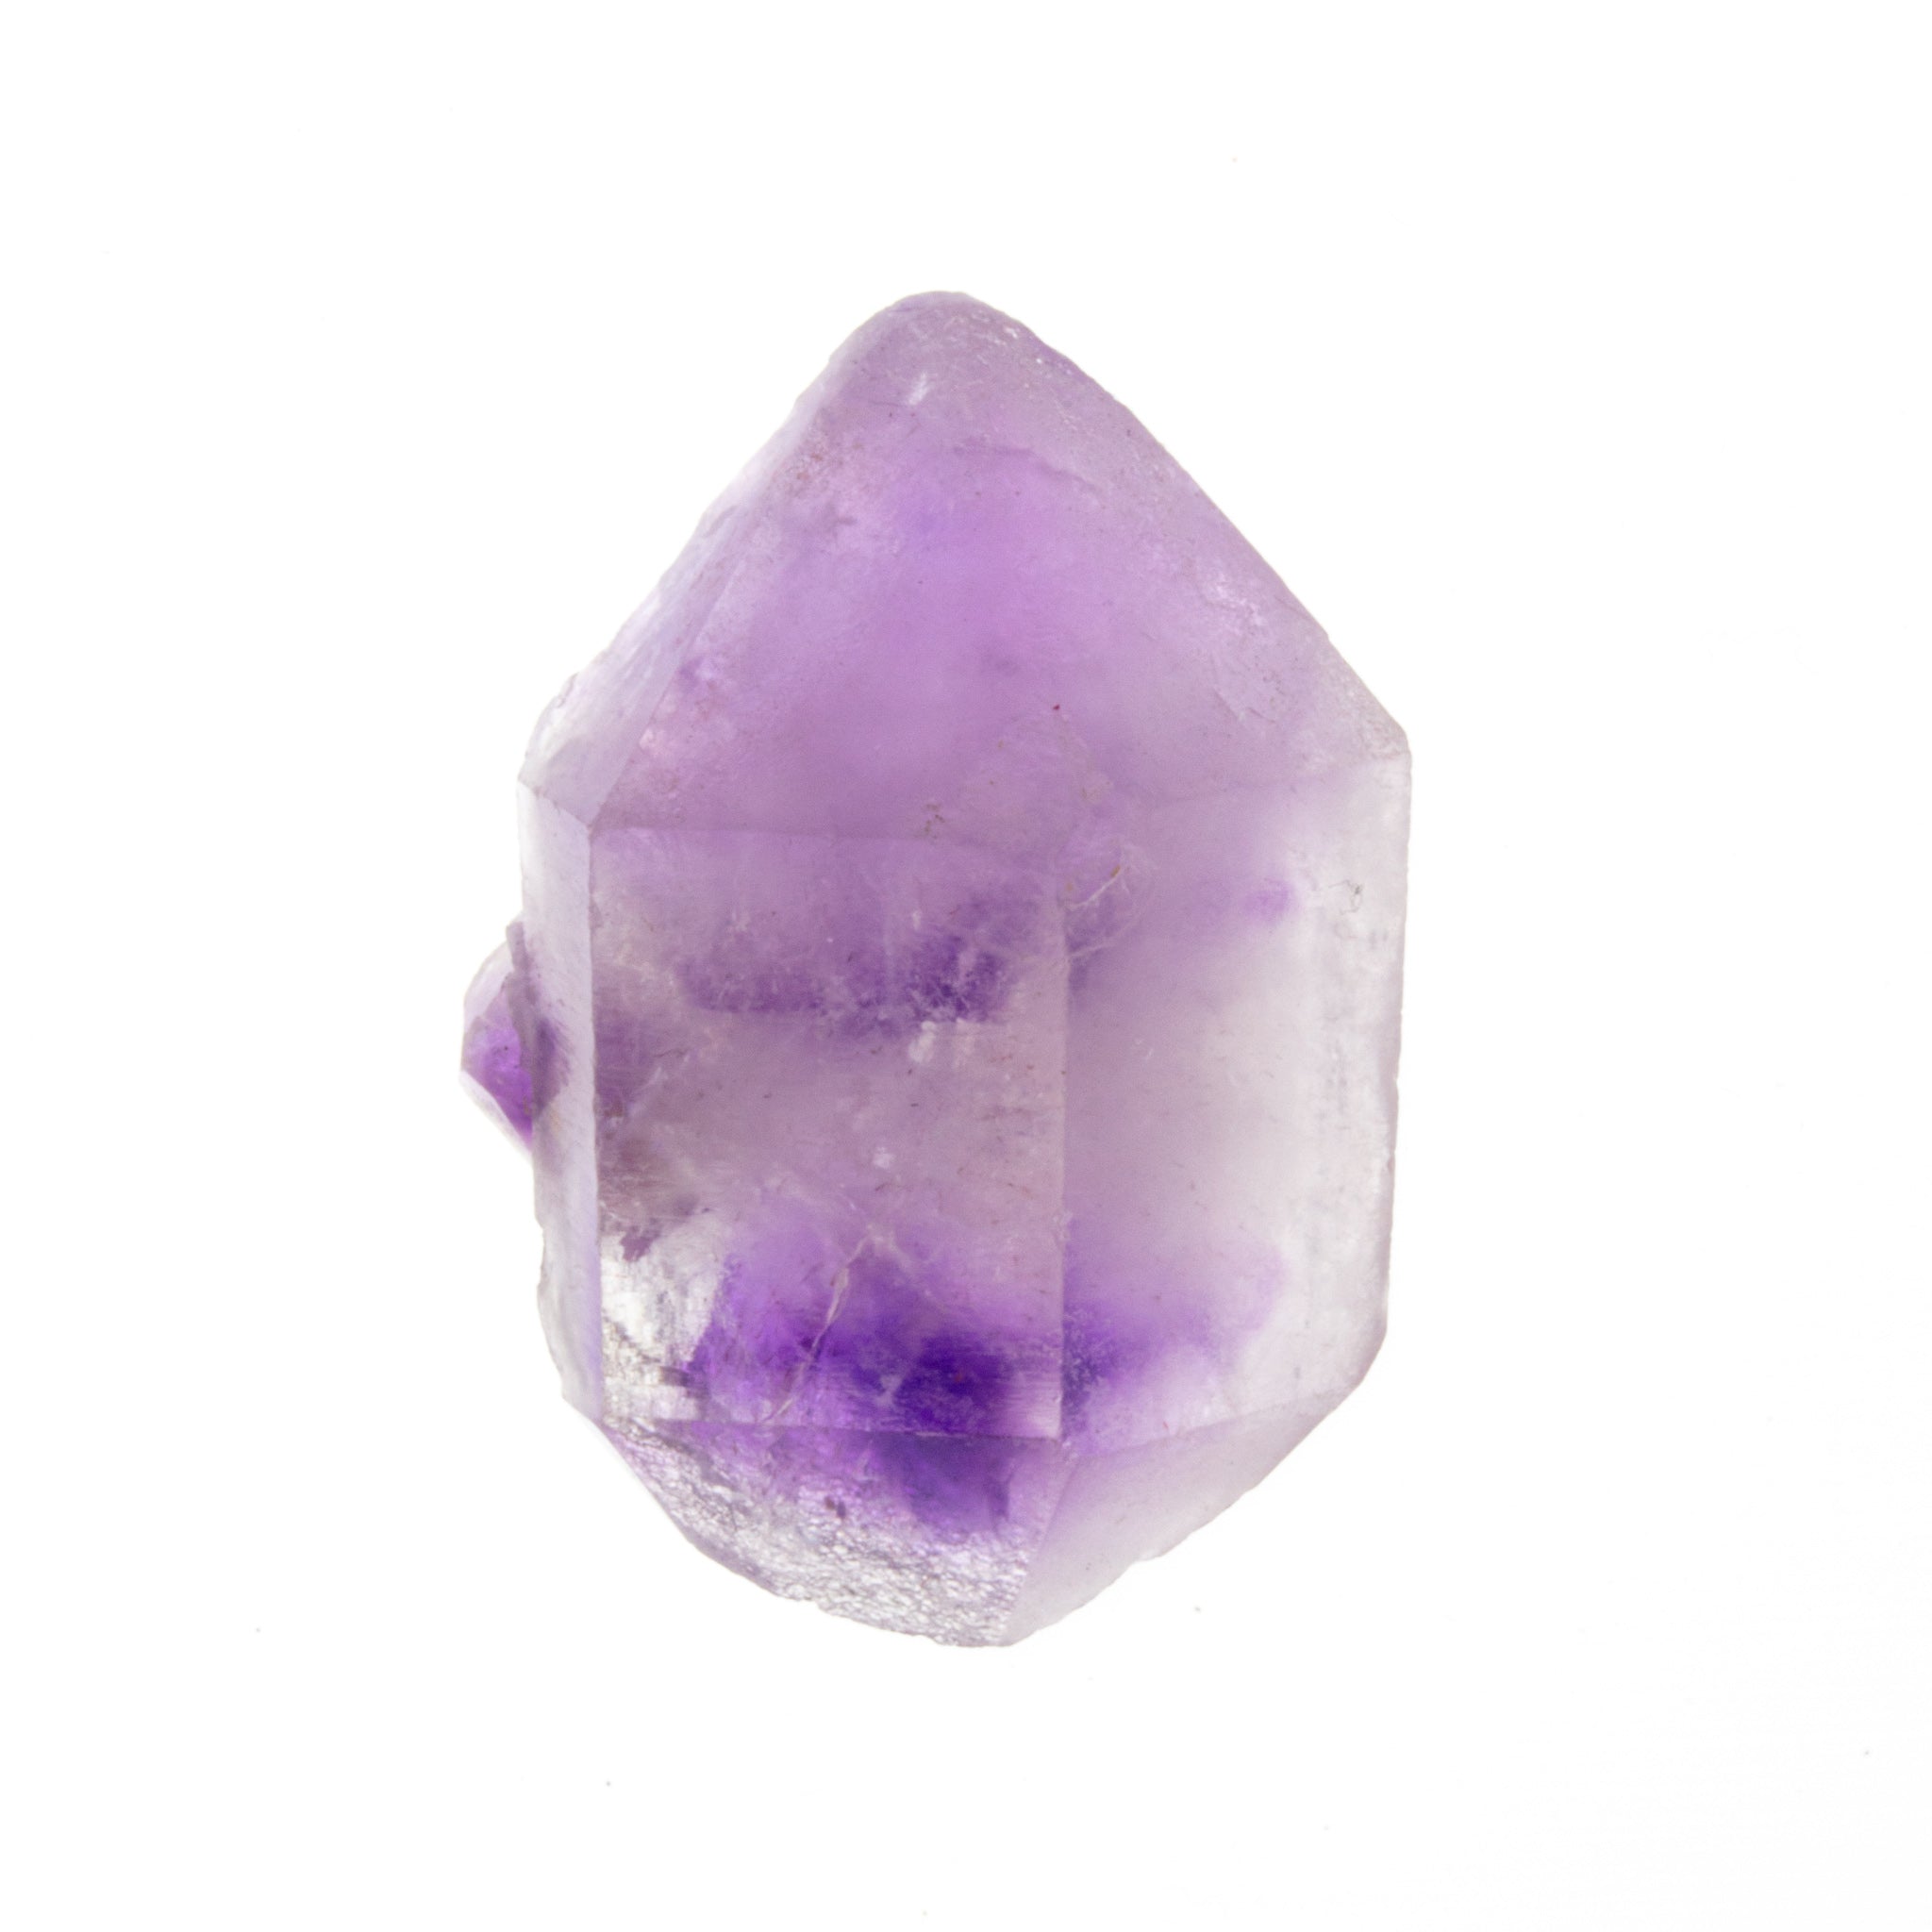 3: 1.04 x 1.49 x .74 inches - 18 grams - $200 Clear tip with dense amethyst coloring paried with a softer expression of ameythst on the other end.